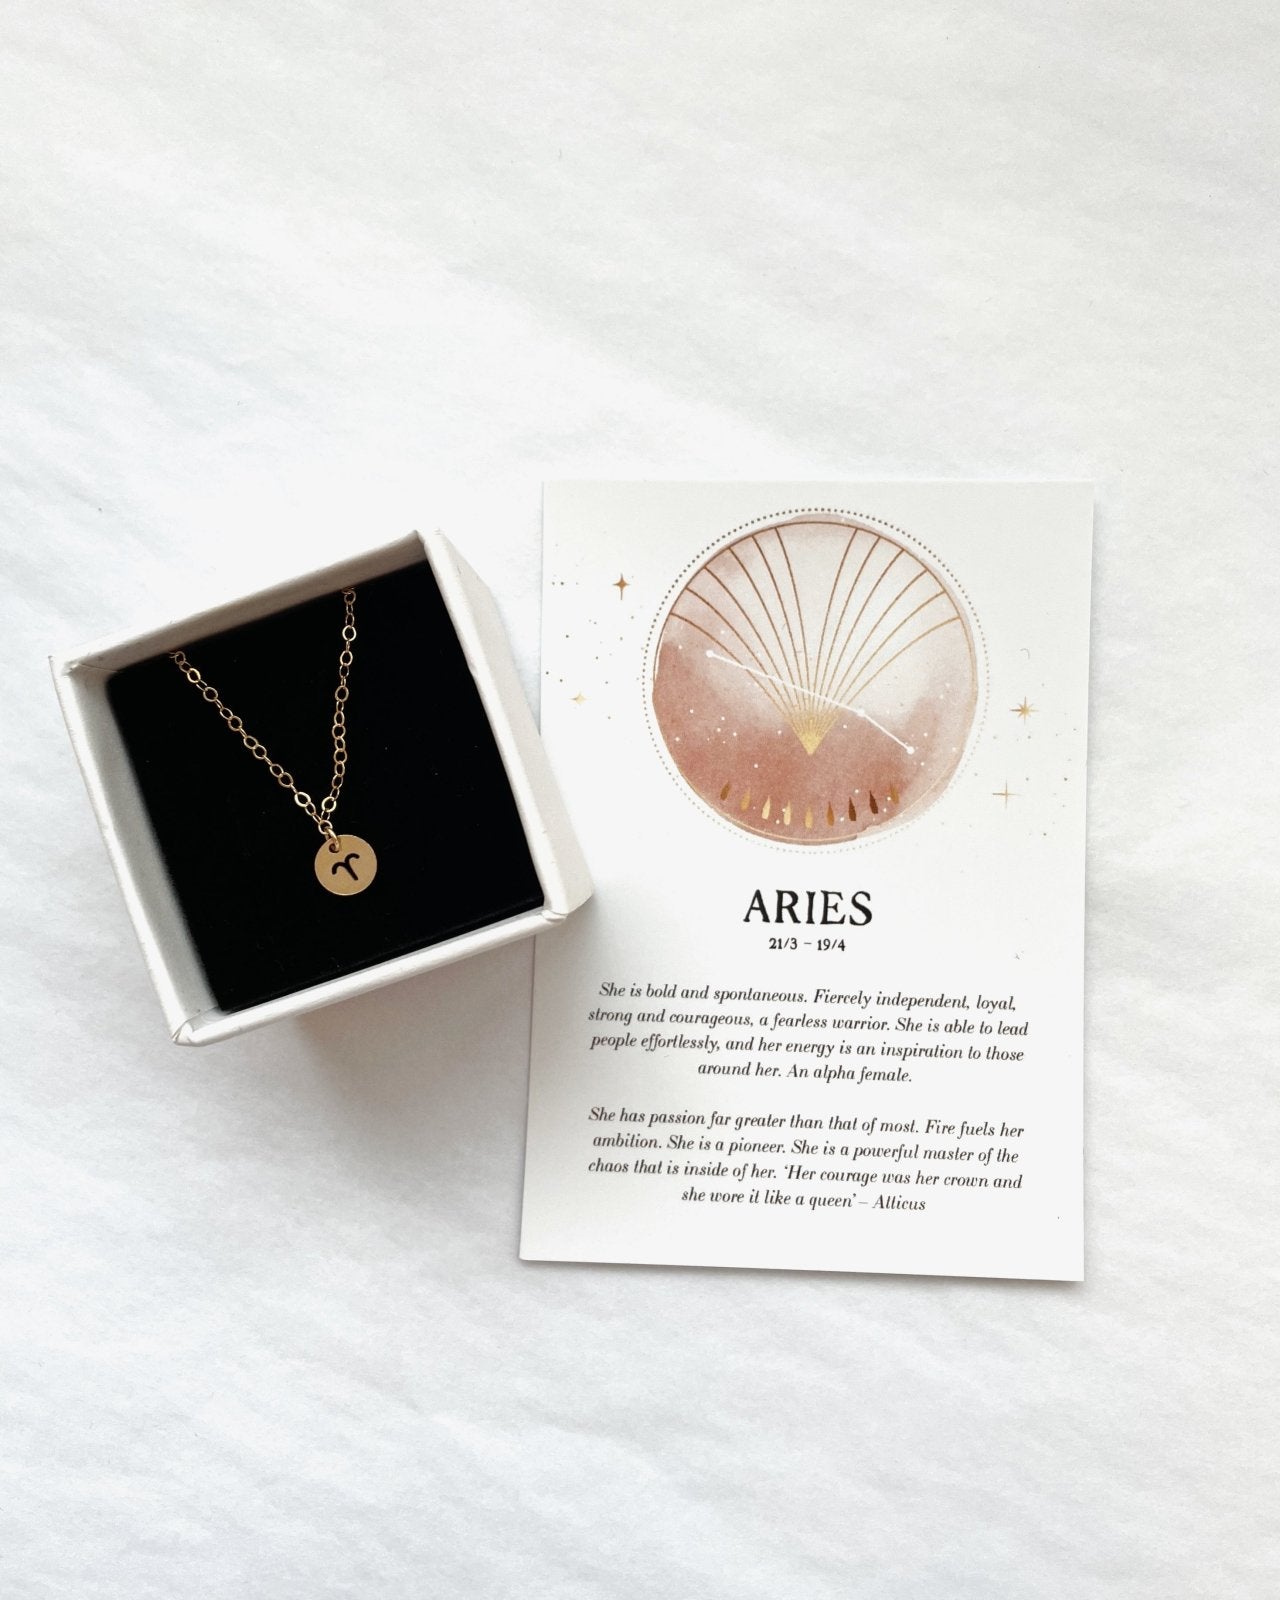 Load image into Gallery viewer, ZODIAC COIN NECKLACE- 14k Yellow Gold - The Littl - Deluxe Chain - 37cm (choker)
